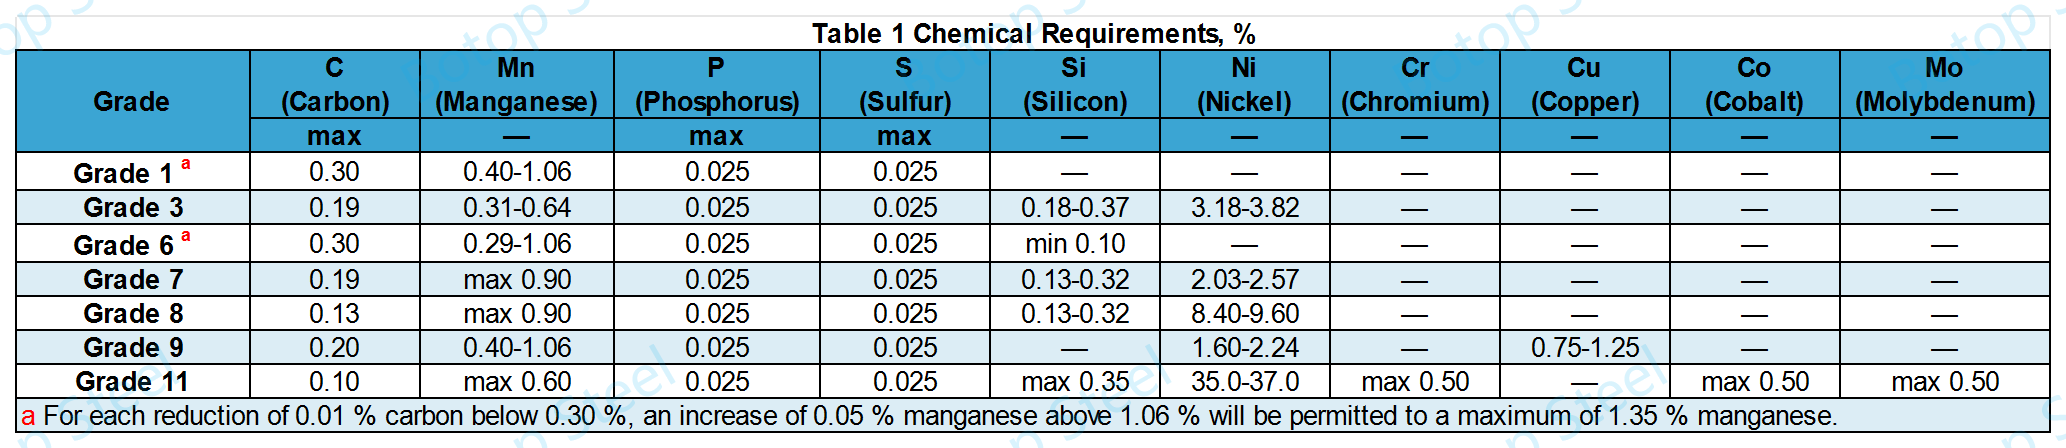 ASTM A334_Chemical Requirements